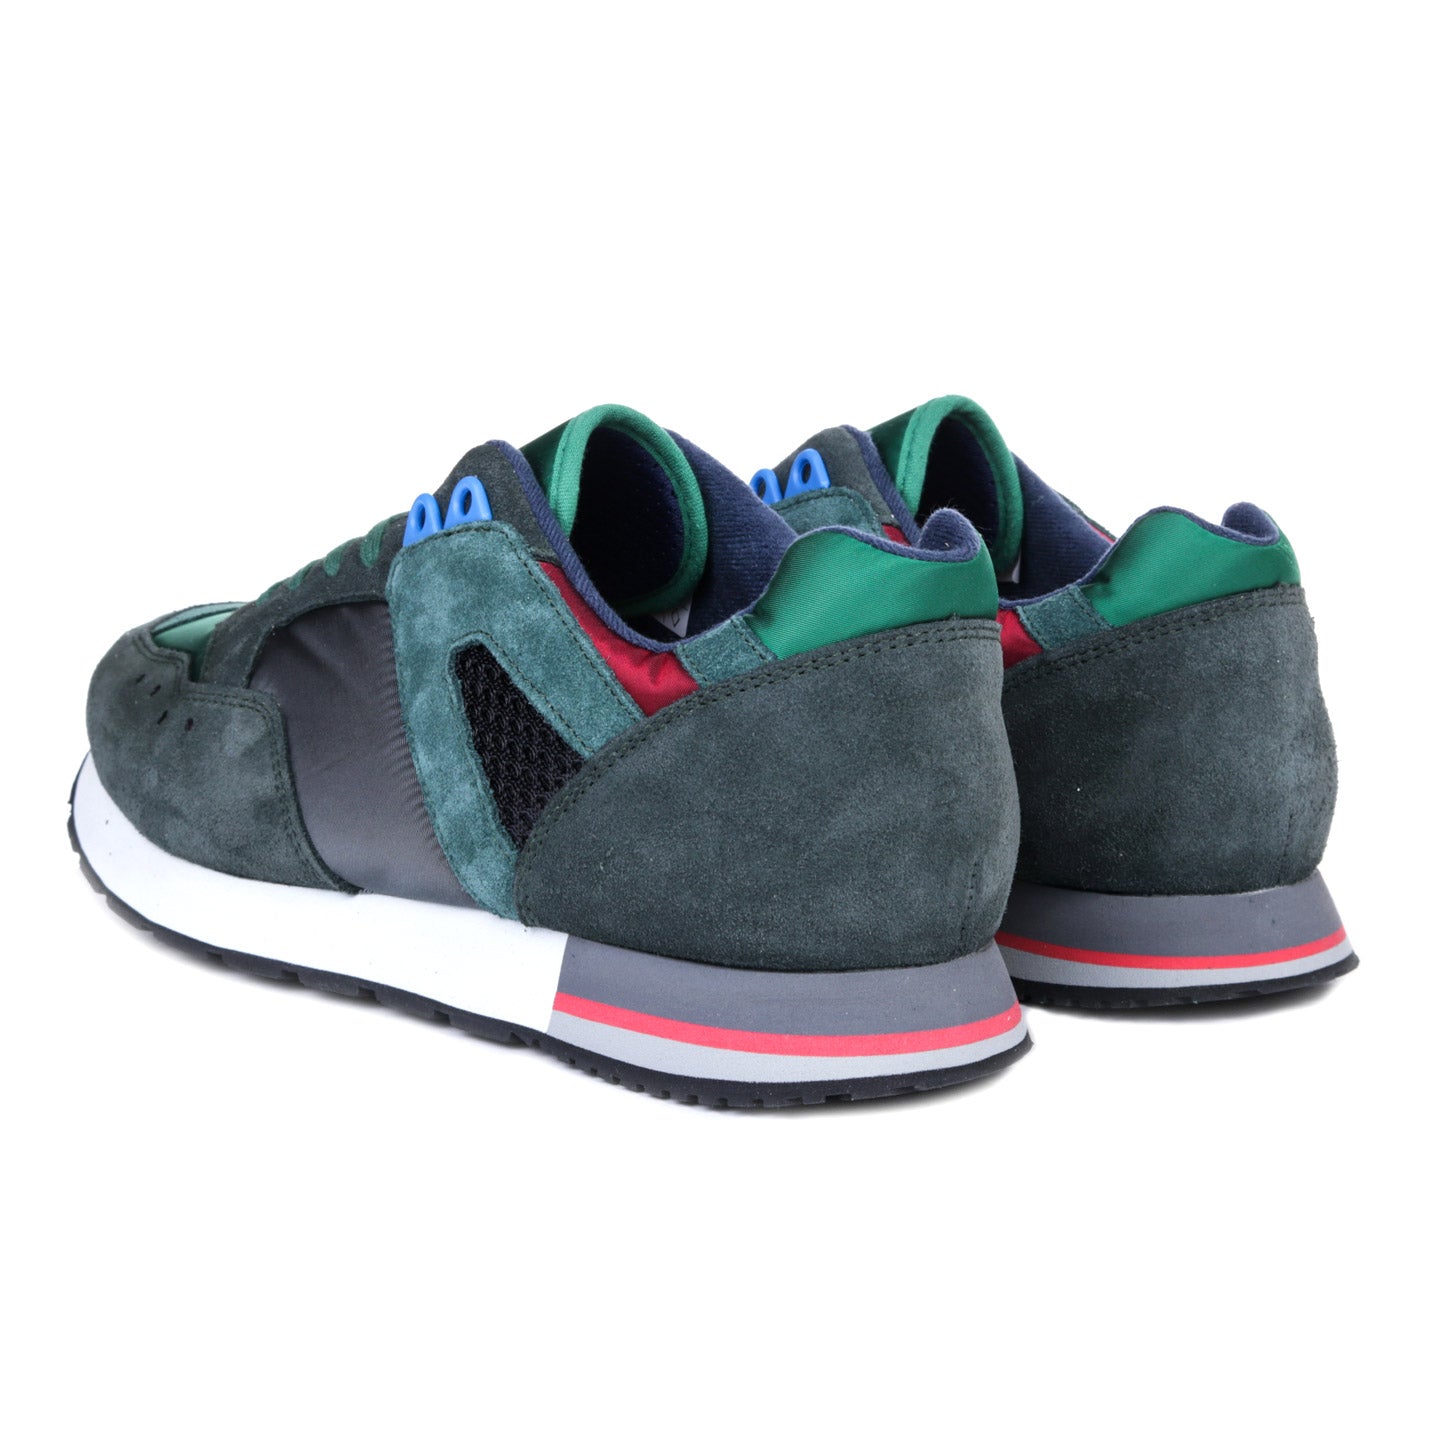 REPRODUCTION OF FOUND FRENCH MILITARY TRAINER CHARCOAL / GREEN